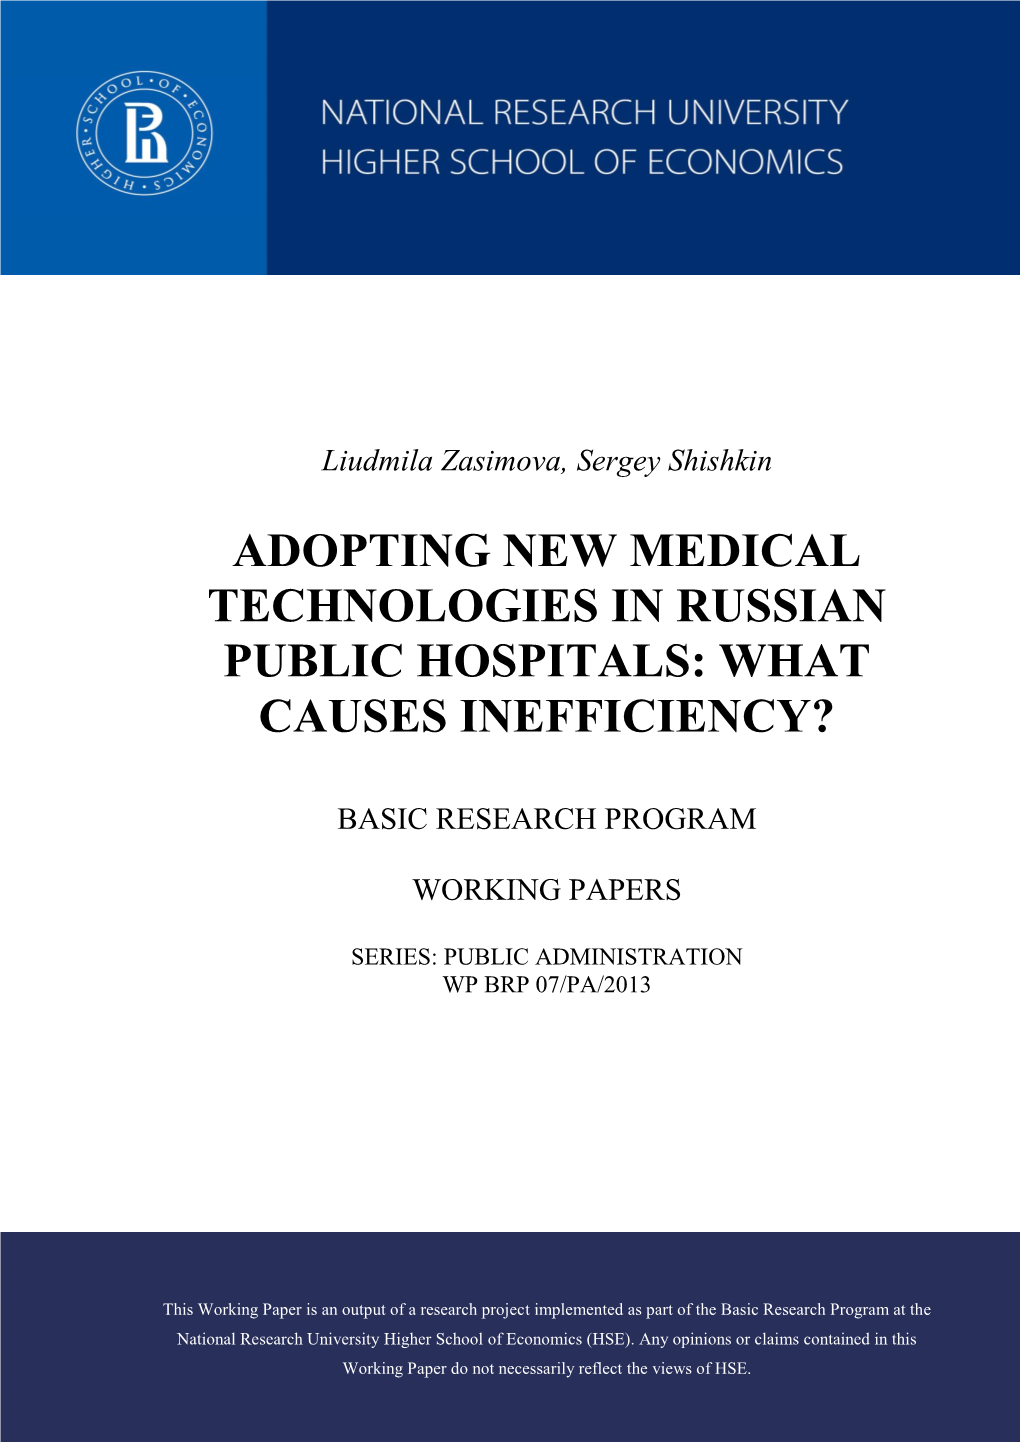 Adopting New Medical Technologies in Russian Public Hospitals: What Causes Inefficiency?